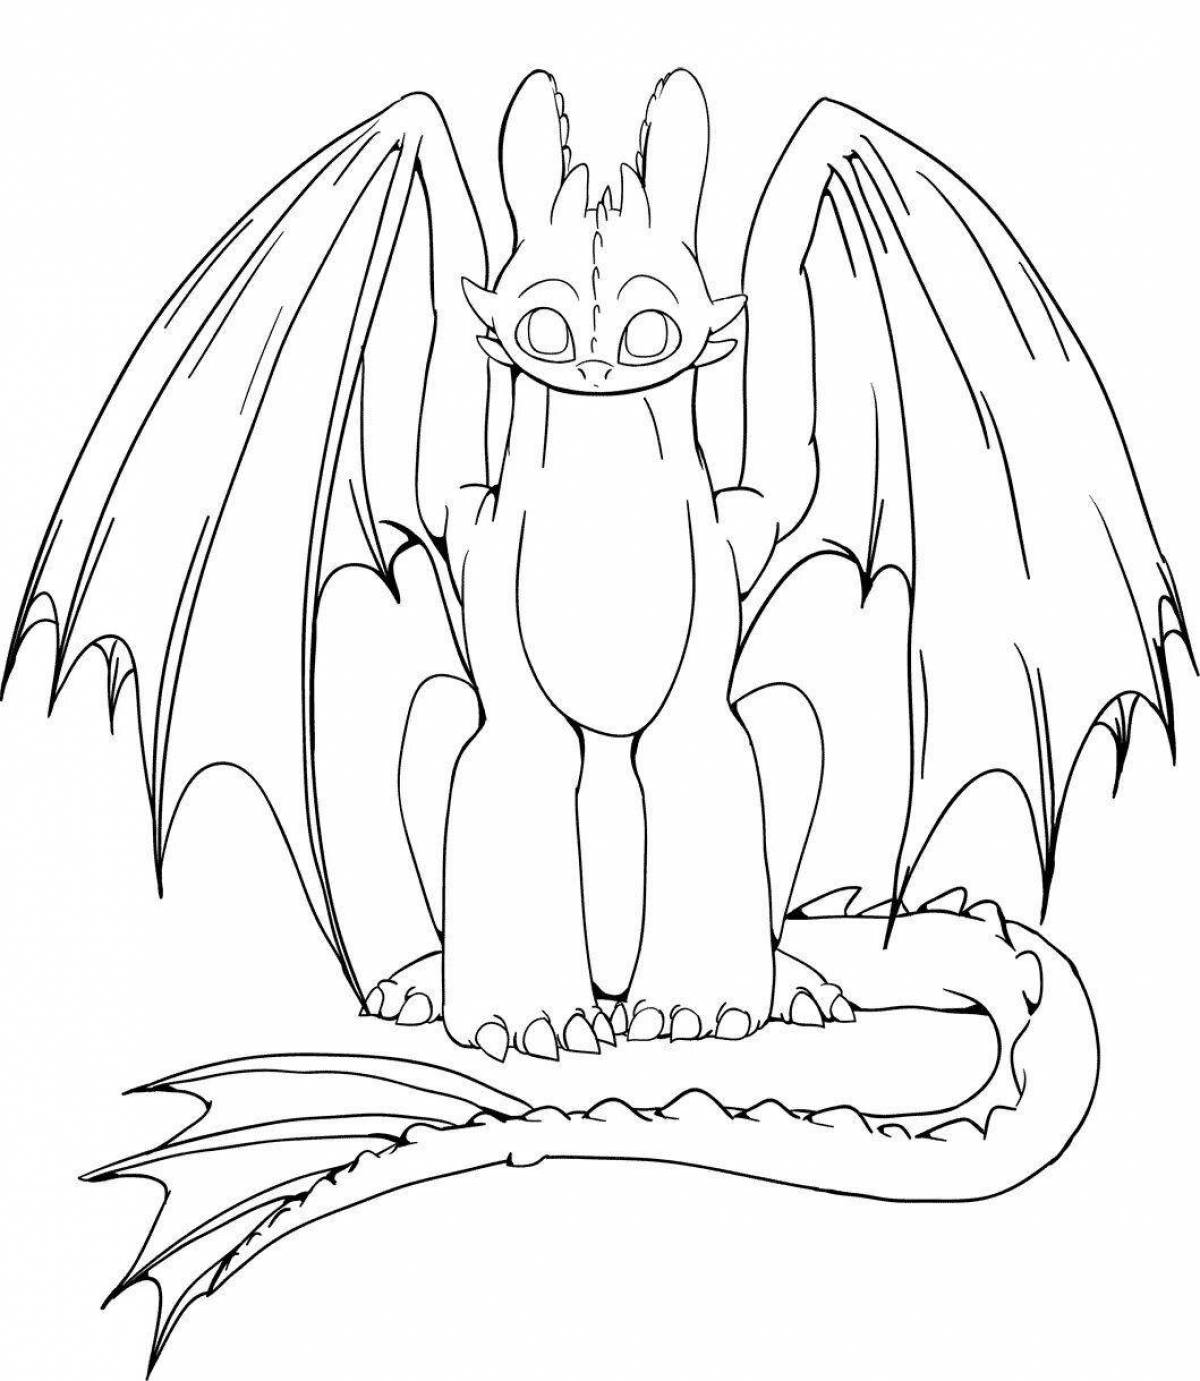 Cute toothless coloring book for kids